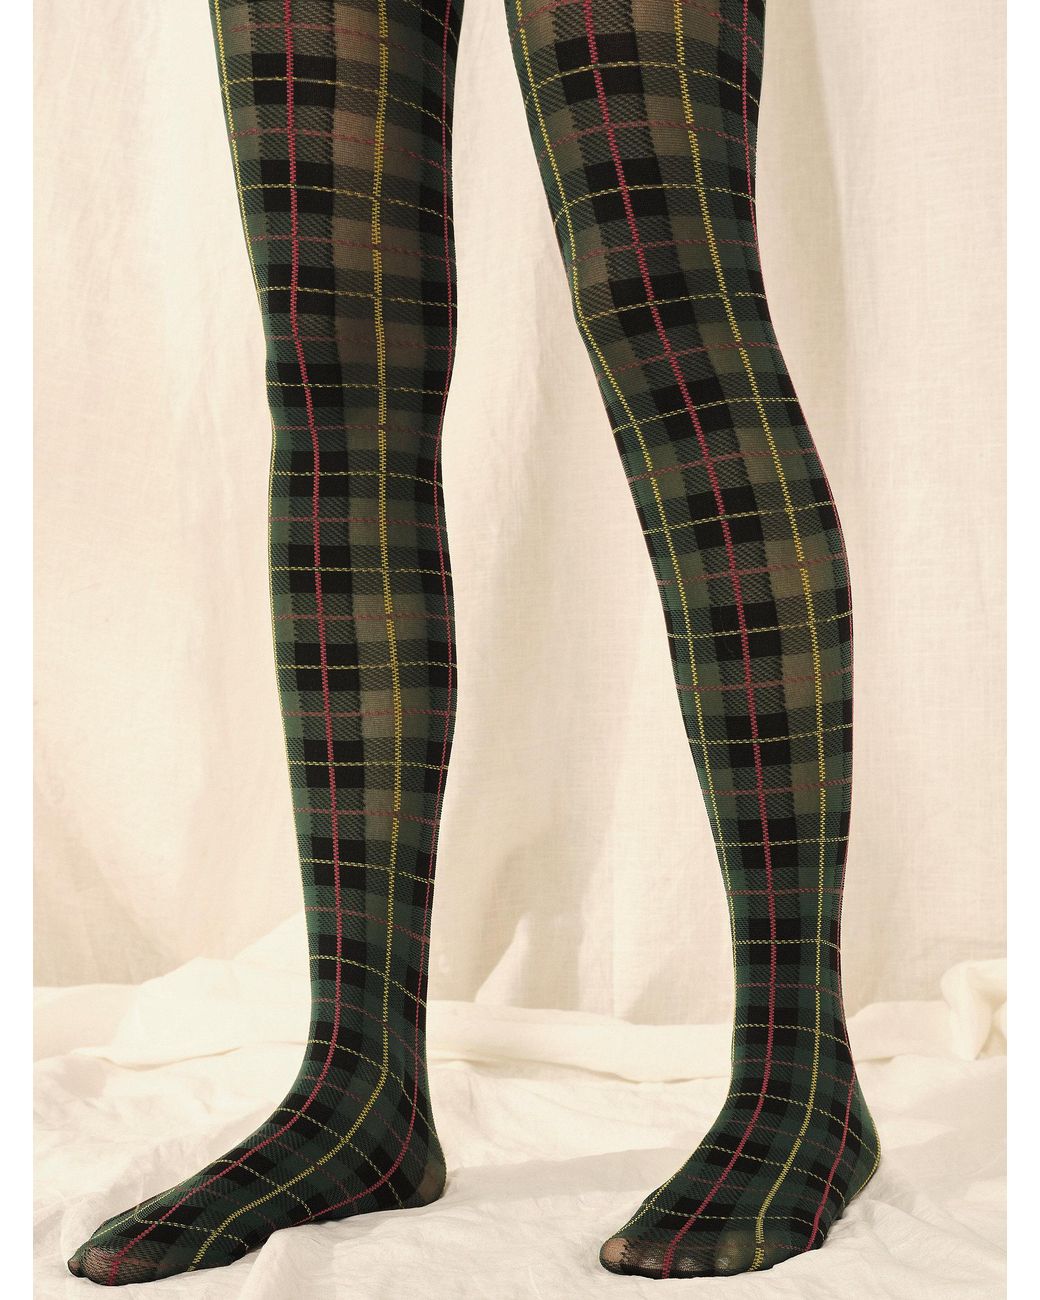 Free People London Plaid Tights in Green | Lyst